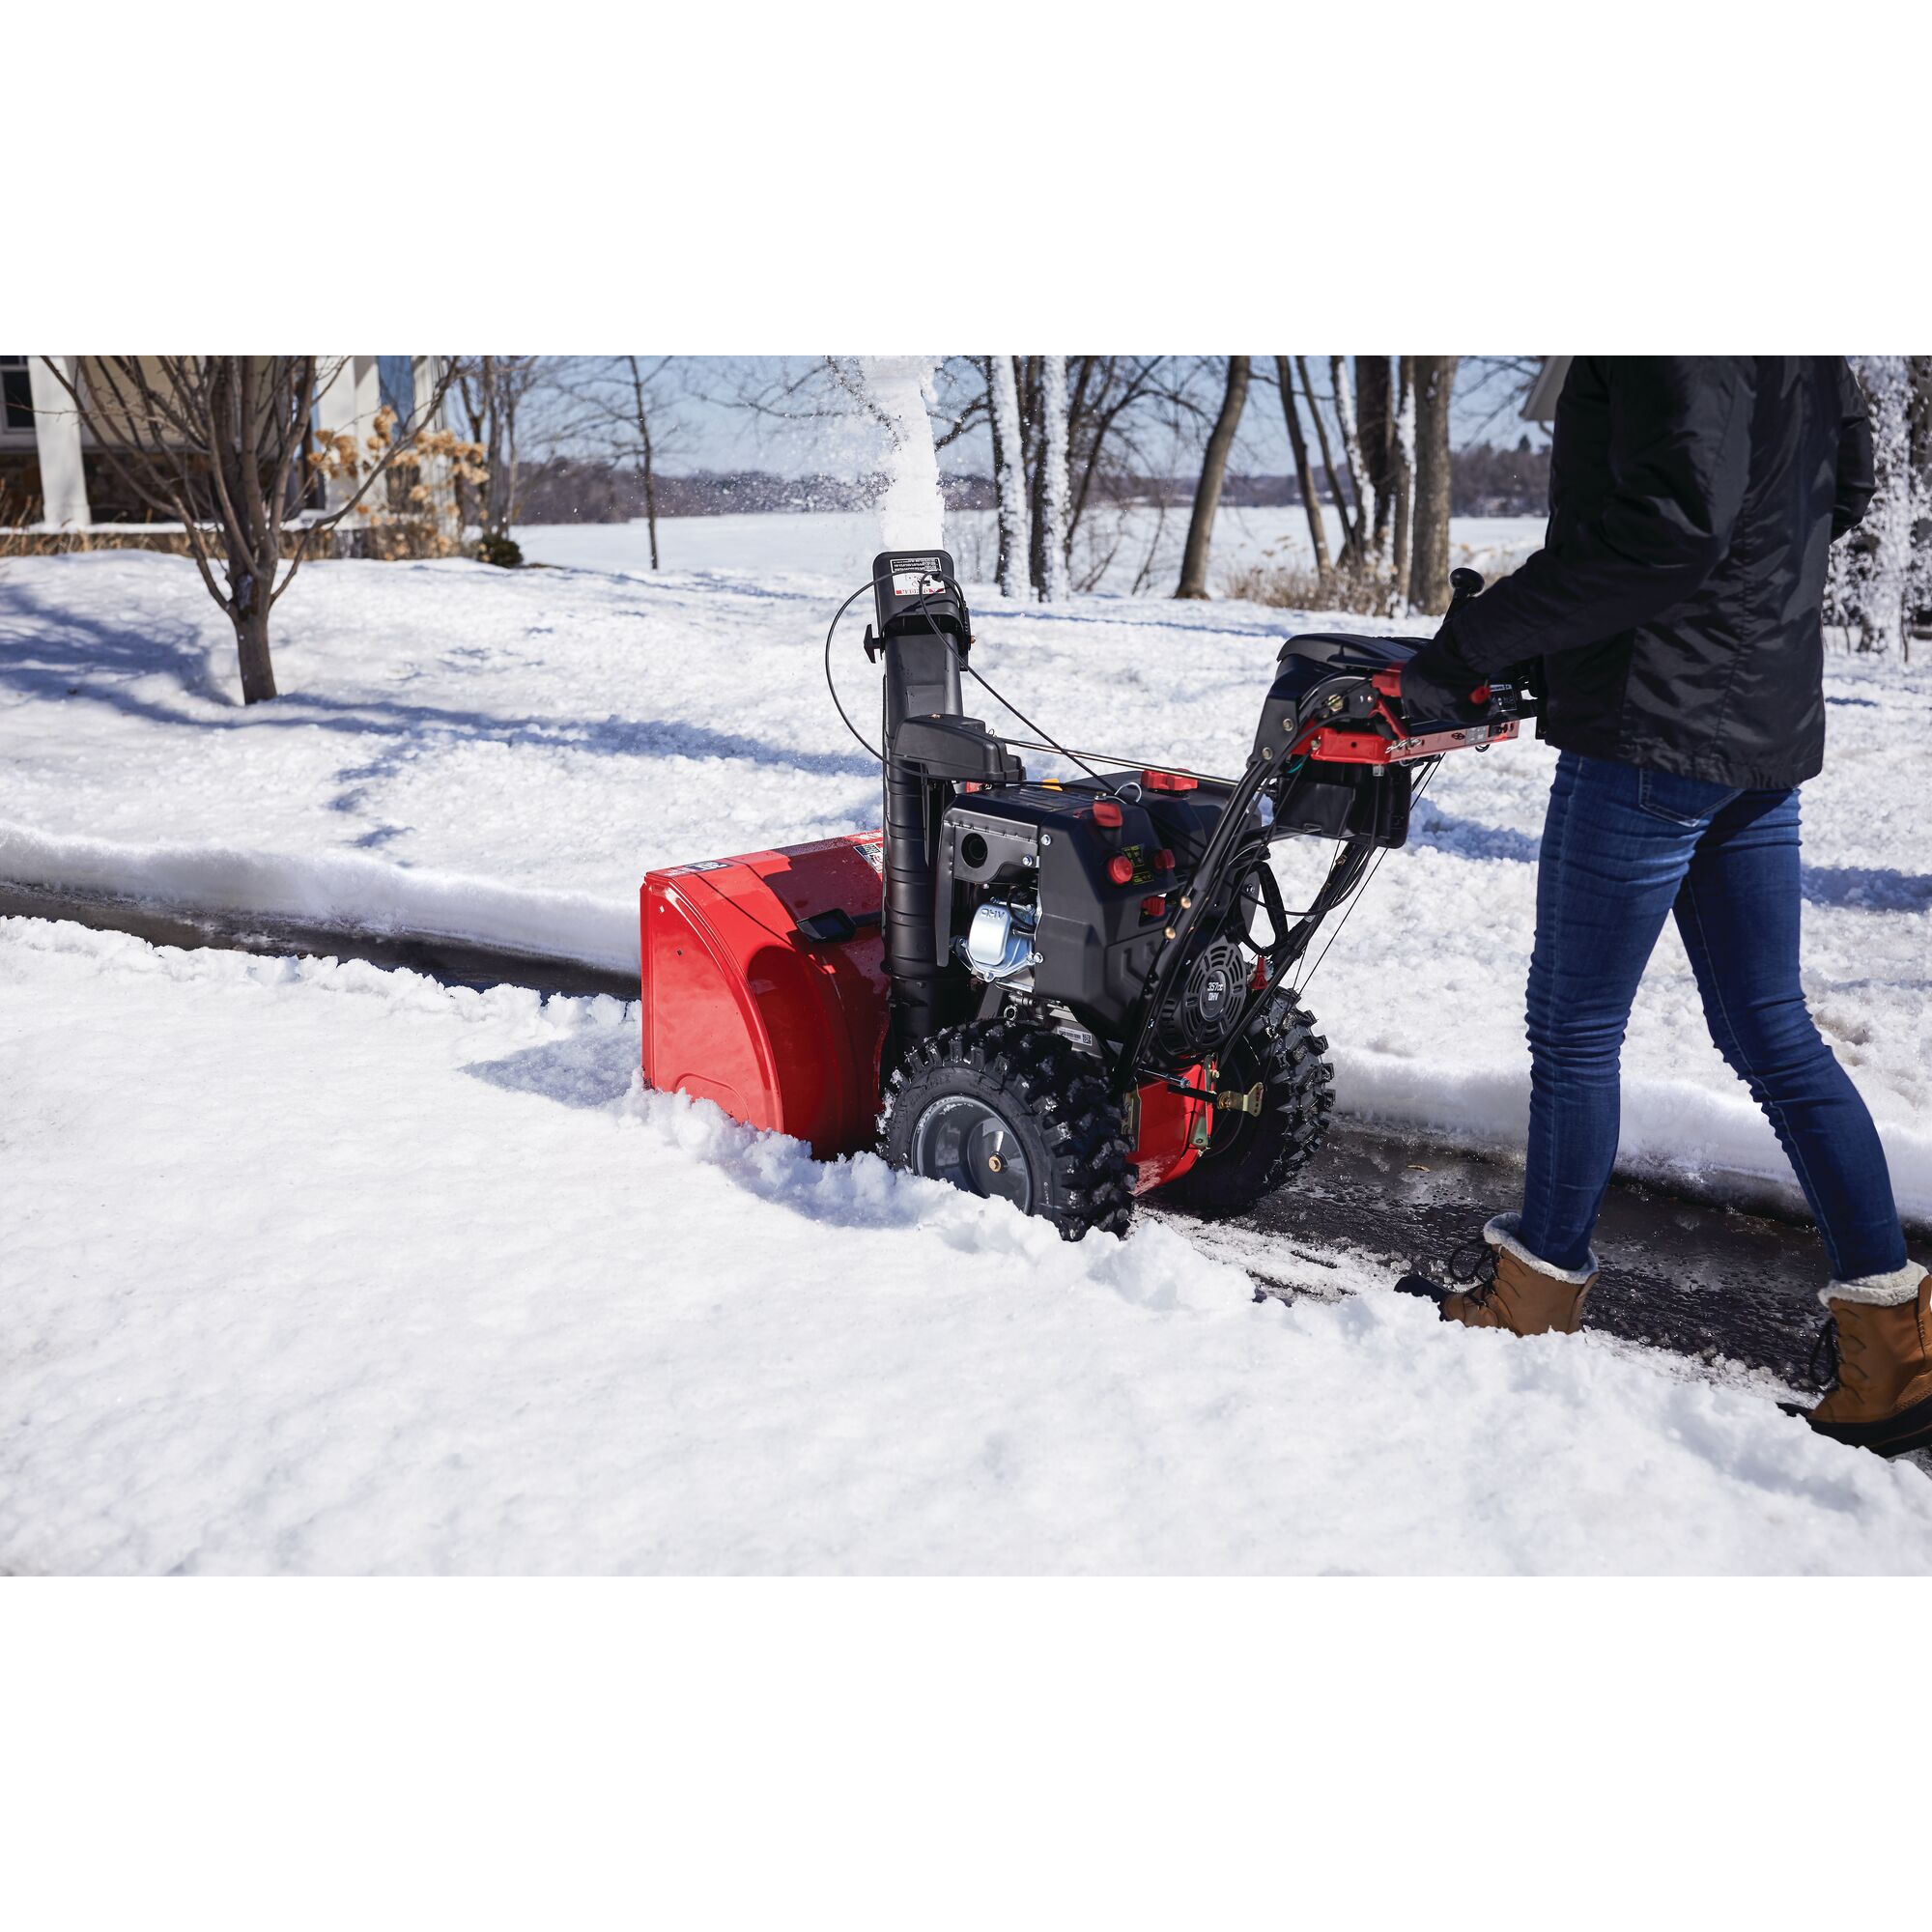 CRAFTSMAN Electric Start Two-Stage Snow Blower in left side view blowing snow in driveway wearing black jacket